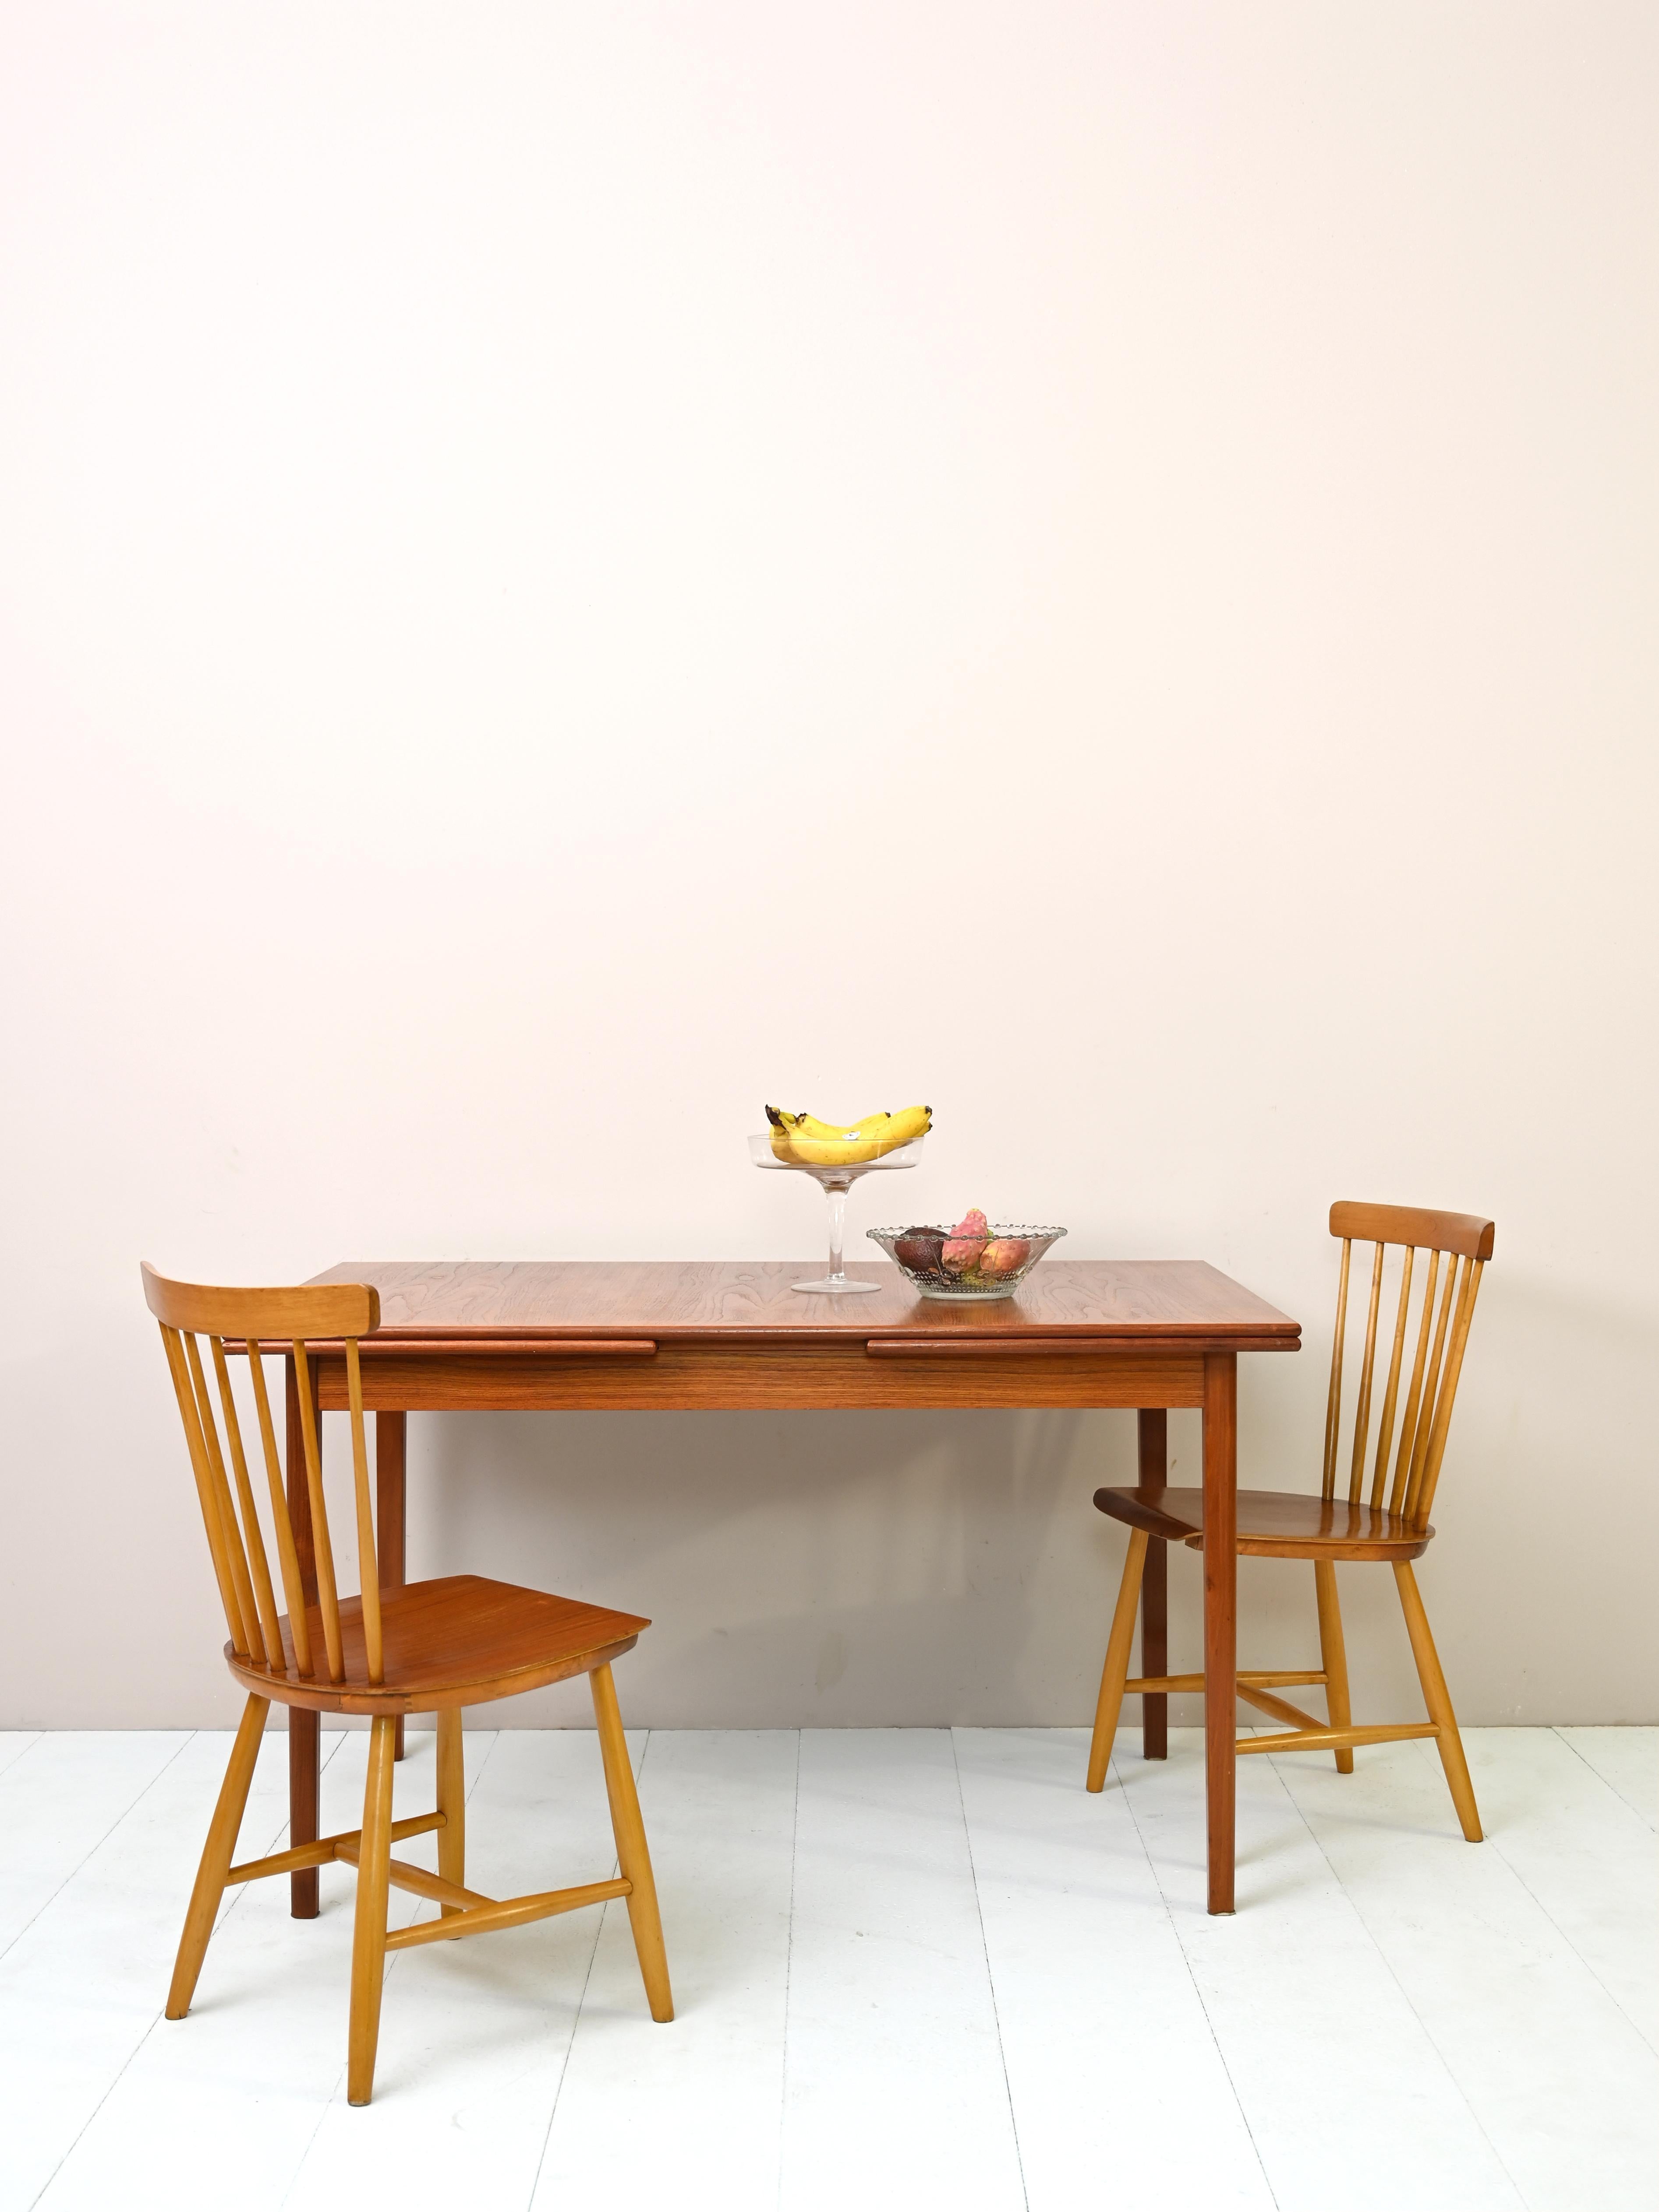 'Made in Denmark' extendable dining table.

Table dimensions open
W 234cm, D 90cm, H 74cm

Table dimensions closed
L 130cm, D 90cm, H 74cm

Vintage 1950s table with two extension leaves 52cm long. The long legs and curved-edged top are the